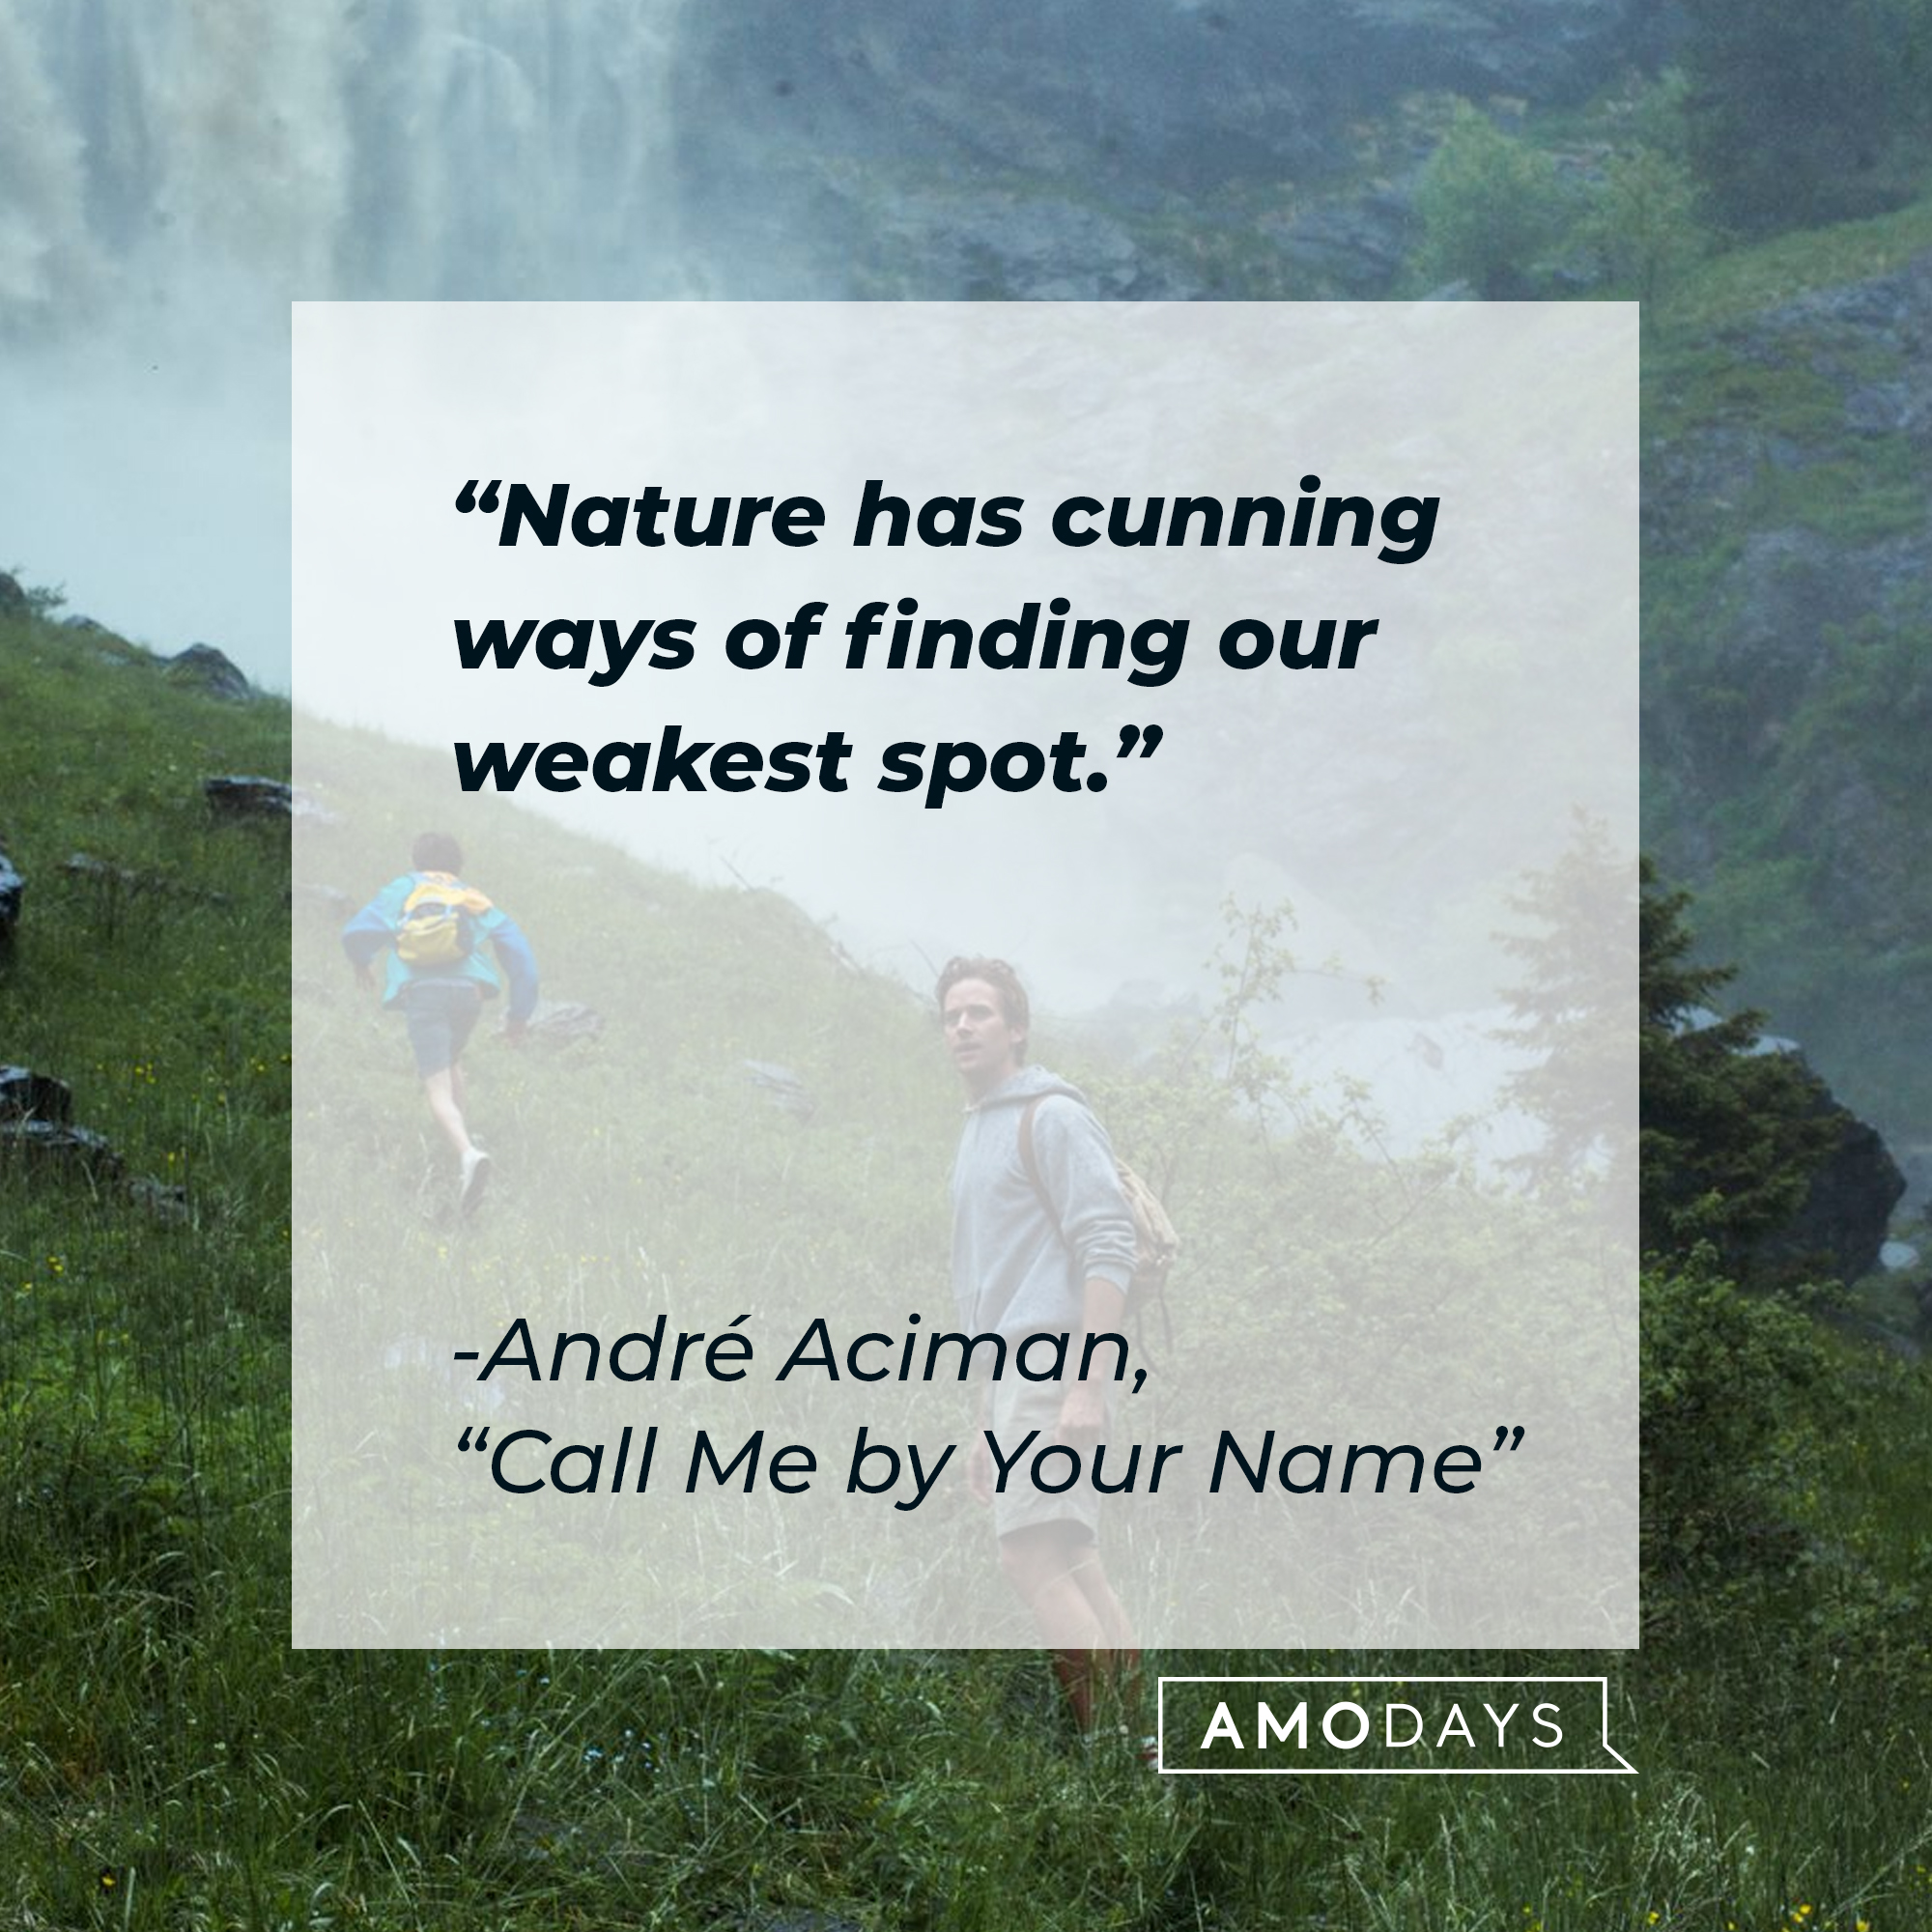 Characters Elio and Oliver from the film “Call Me By Your Name,” with a quote by the author, André Aciman, from the book it’s based on: Nature has cunning ways of finding our weakest spot.” | Source: Facebook.com/CallMeByYourNameFilm